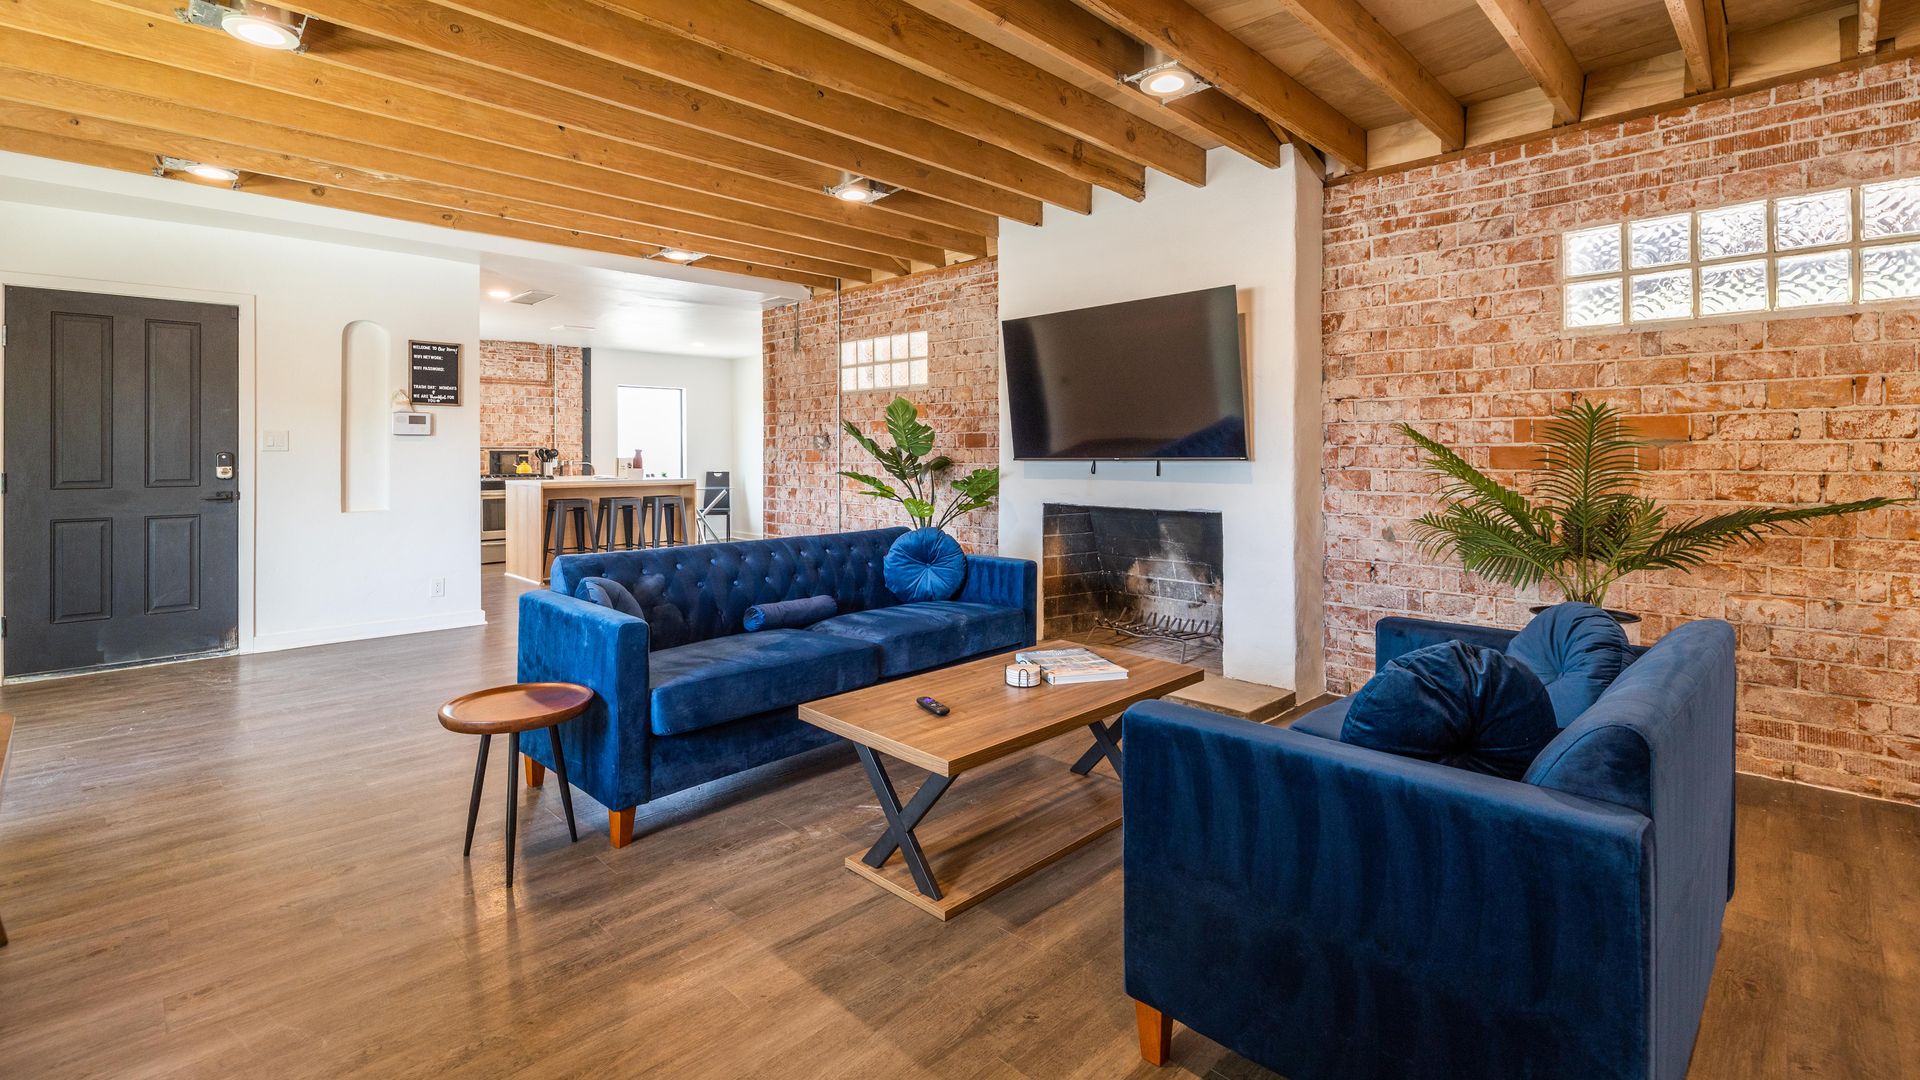 An open-concept house with exposed brick.